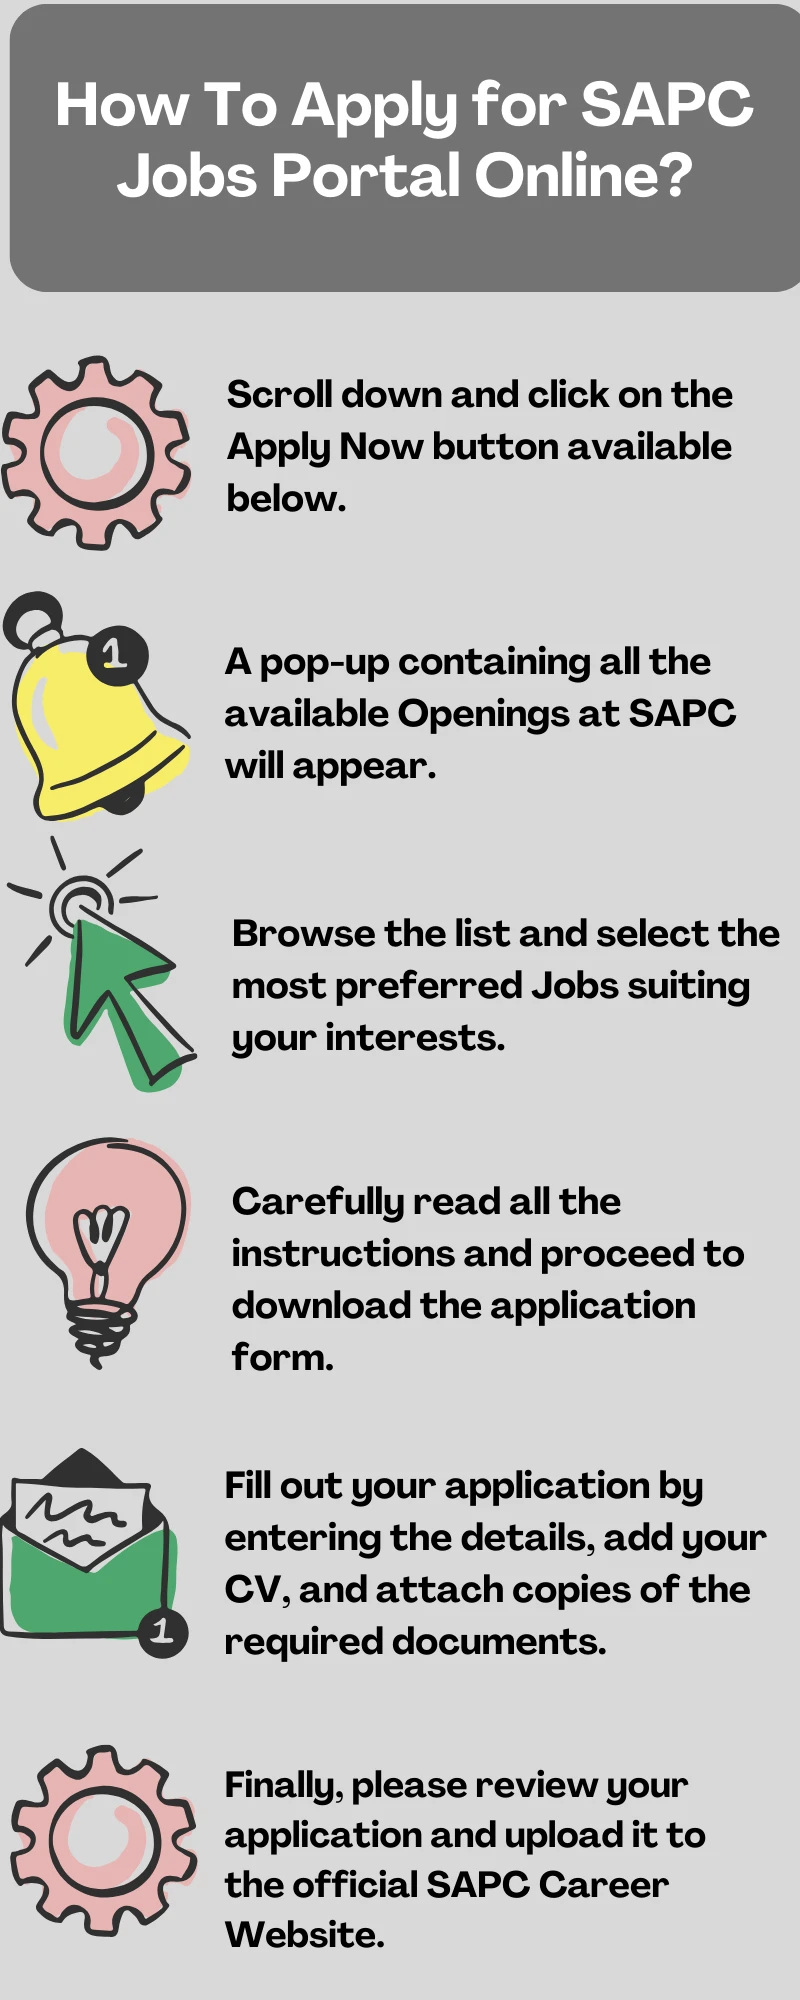 How To Apply for SAPC Jobs Portal Online?